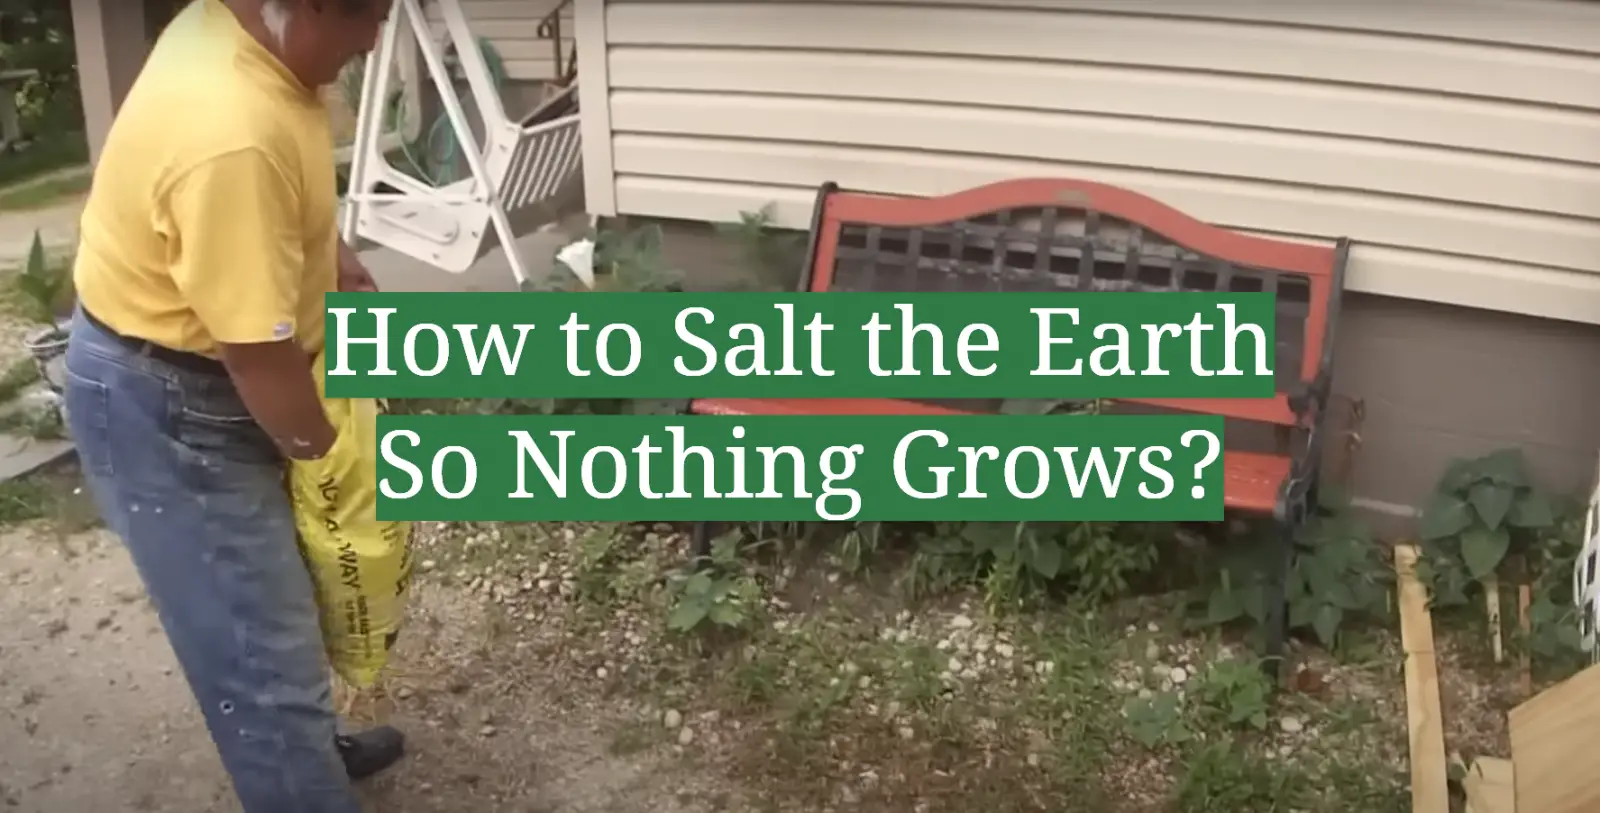 How to Salt the Earth So Nothing Grows?